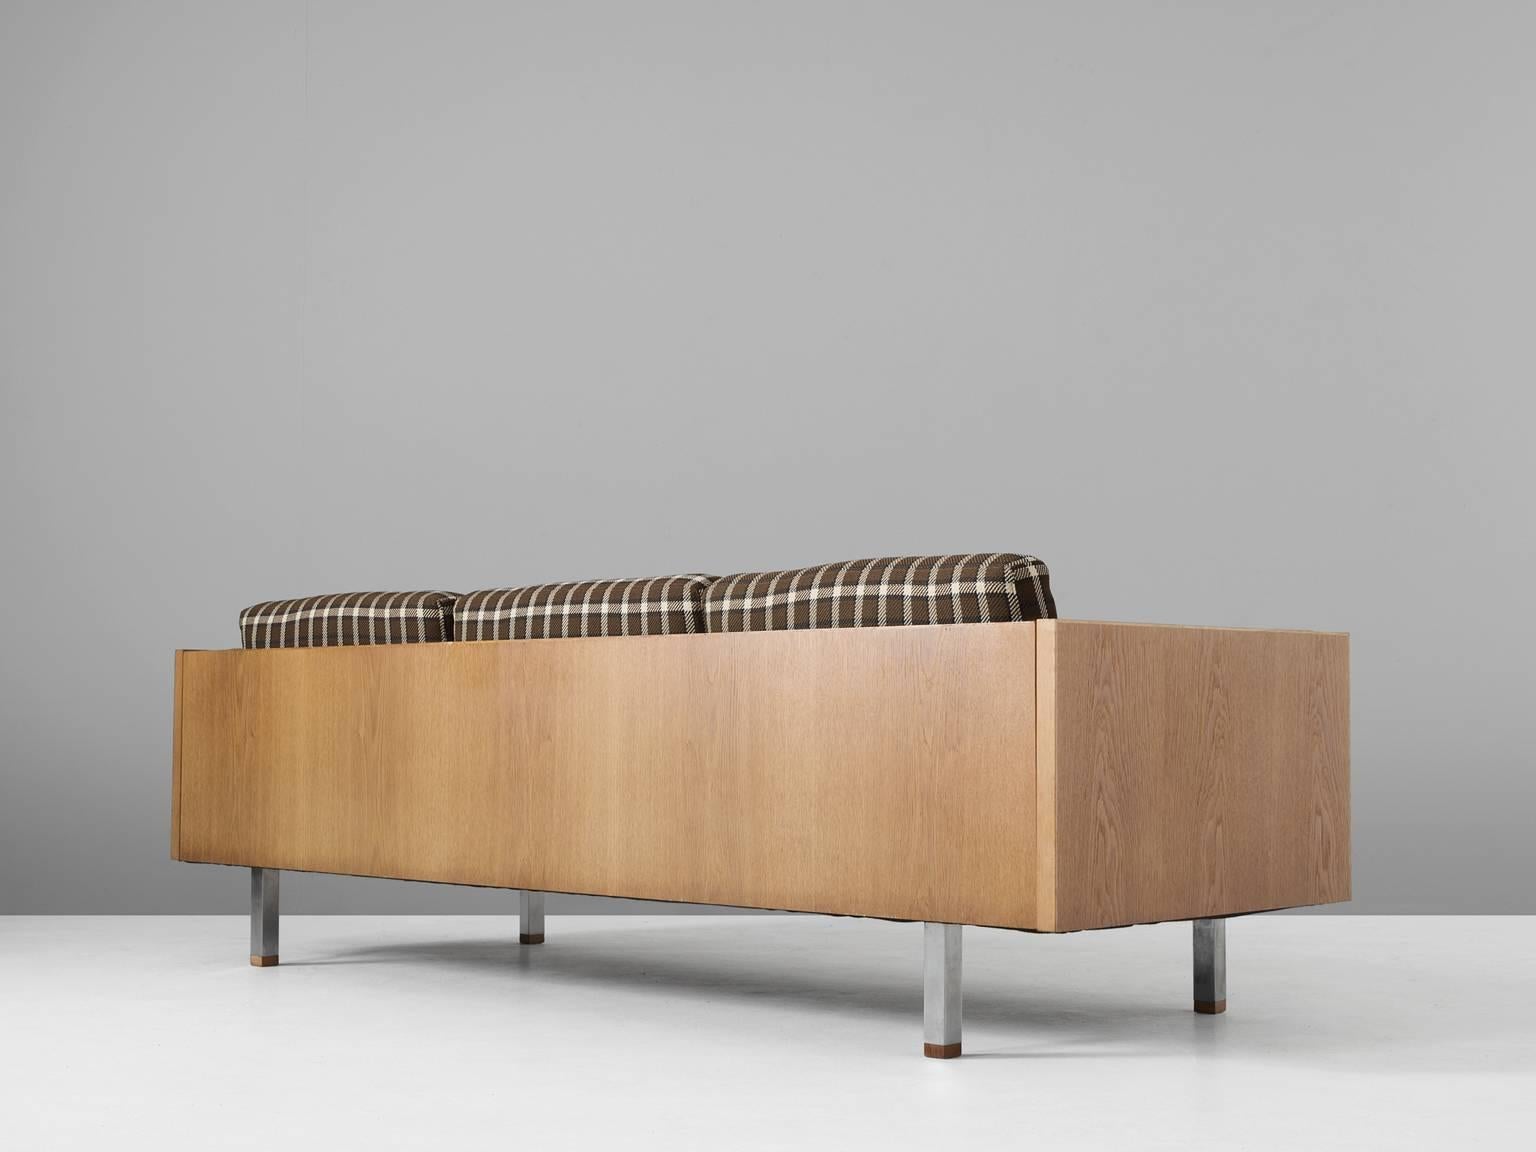 Three-seat sofa in oak, metal and fabric, Scandinavia, 1960s.

Scandinavian three-seat sofa. The frame consists of oak with cubic metal legs, which provide an open look to the quite solid seating. All sides are covered with wood and show the